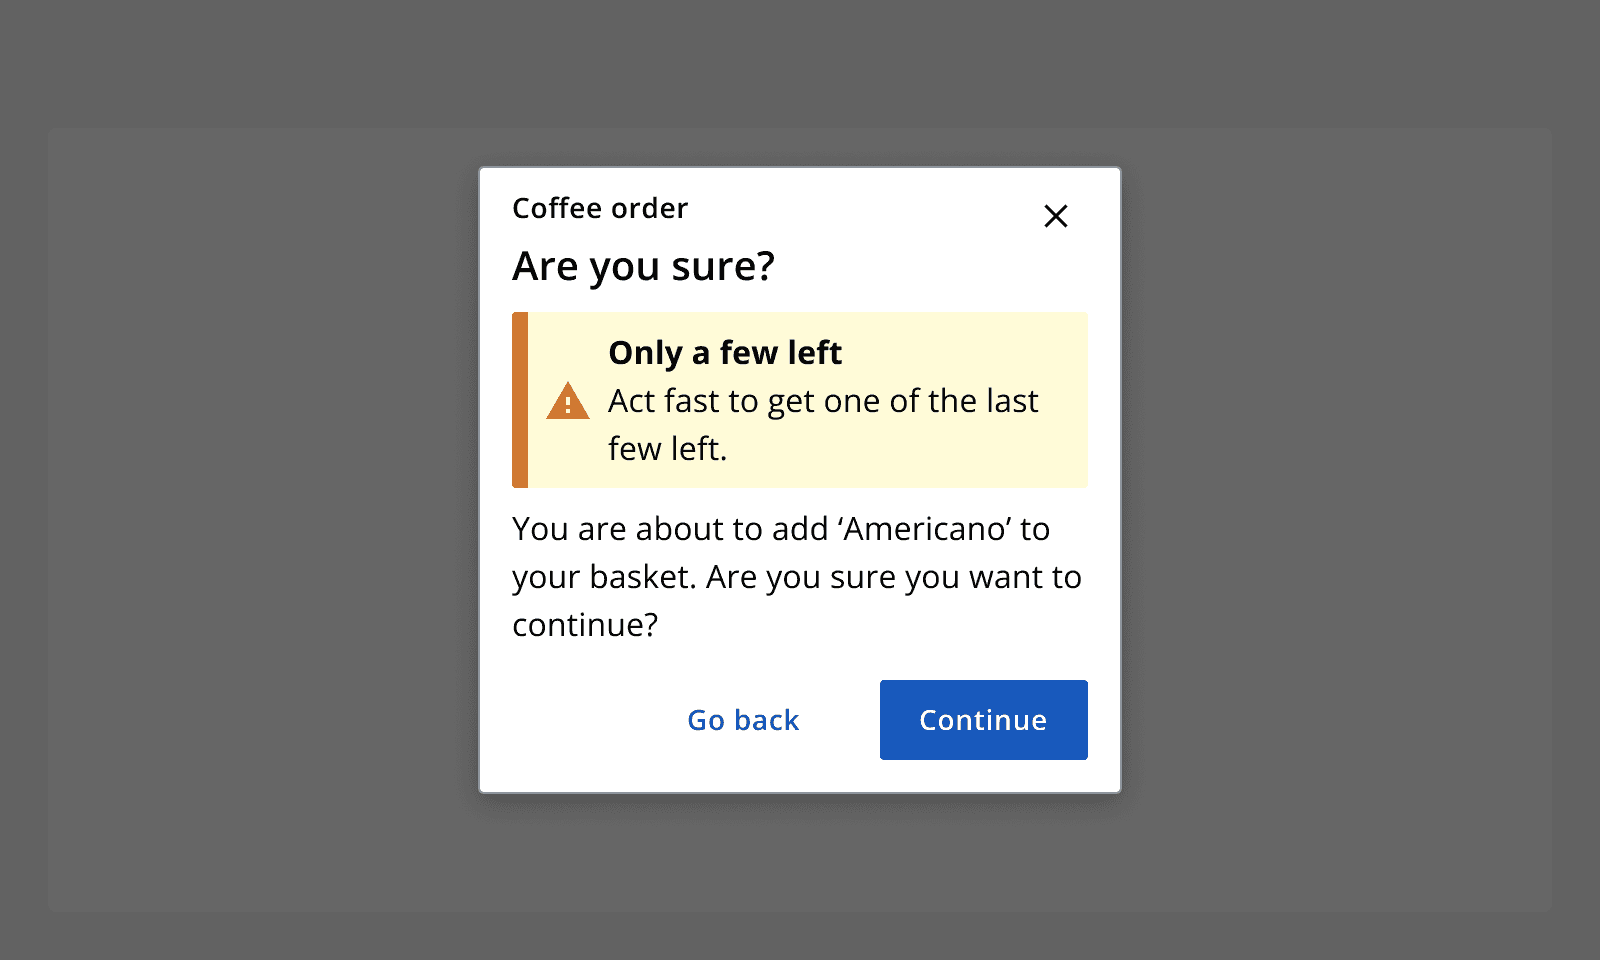 An example dialog for a coffee order asking if the user is sure they want to continue adding the product 'Americano' to their basket. It contains a warning alert that says 'Only a few left'.